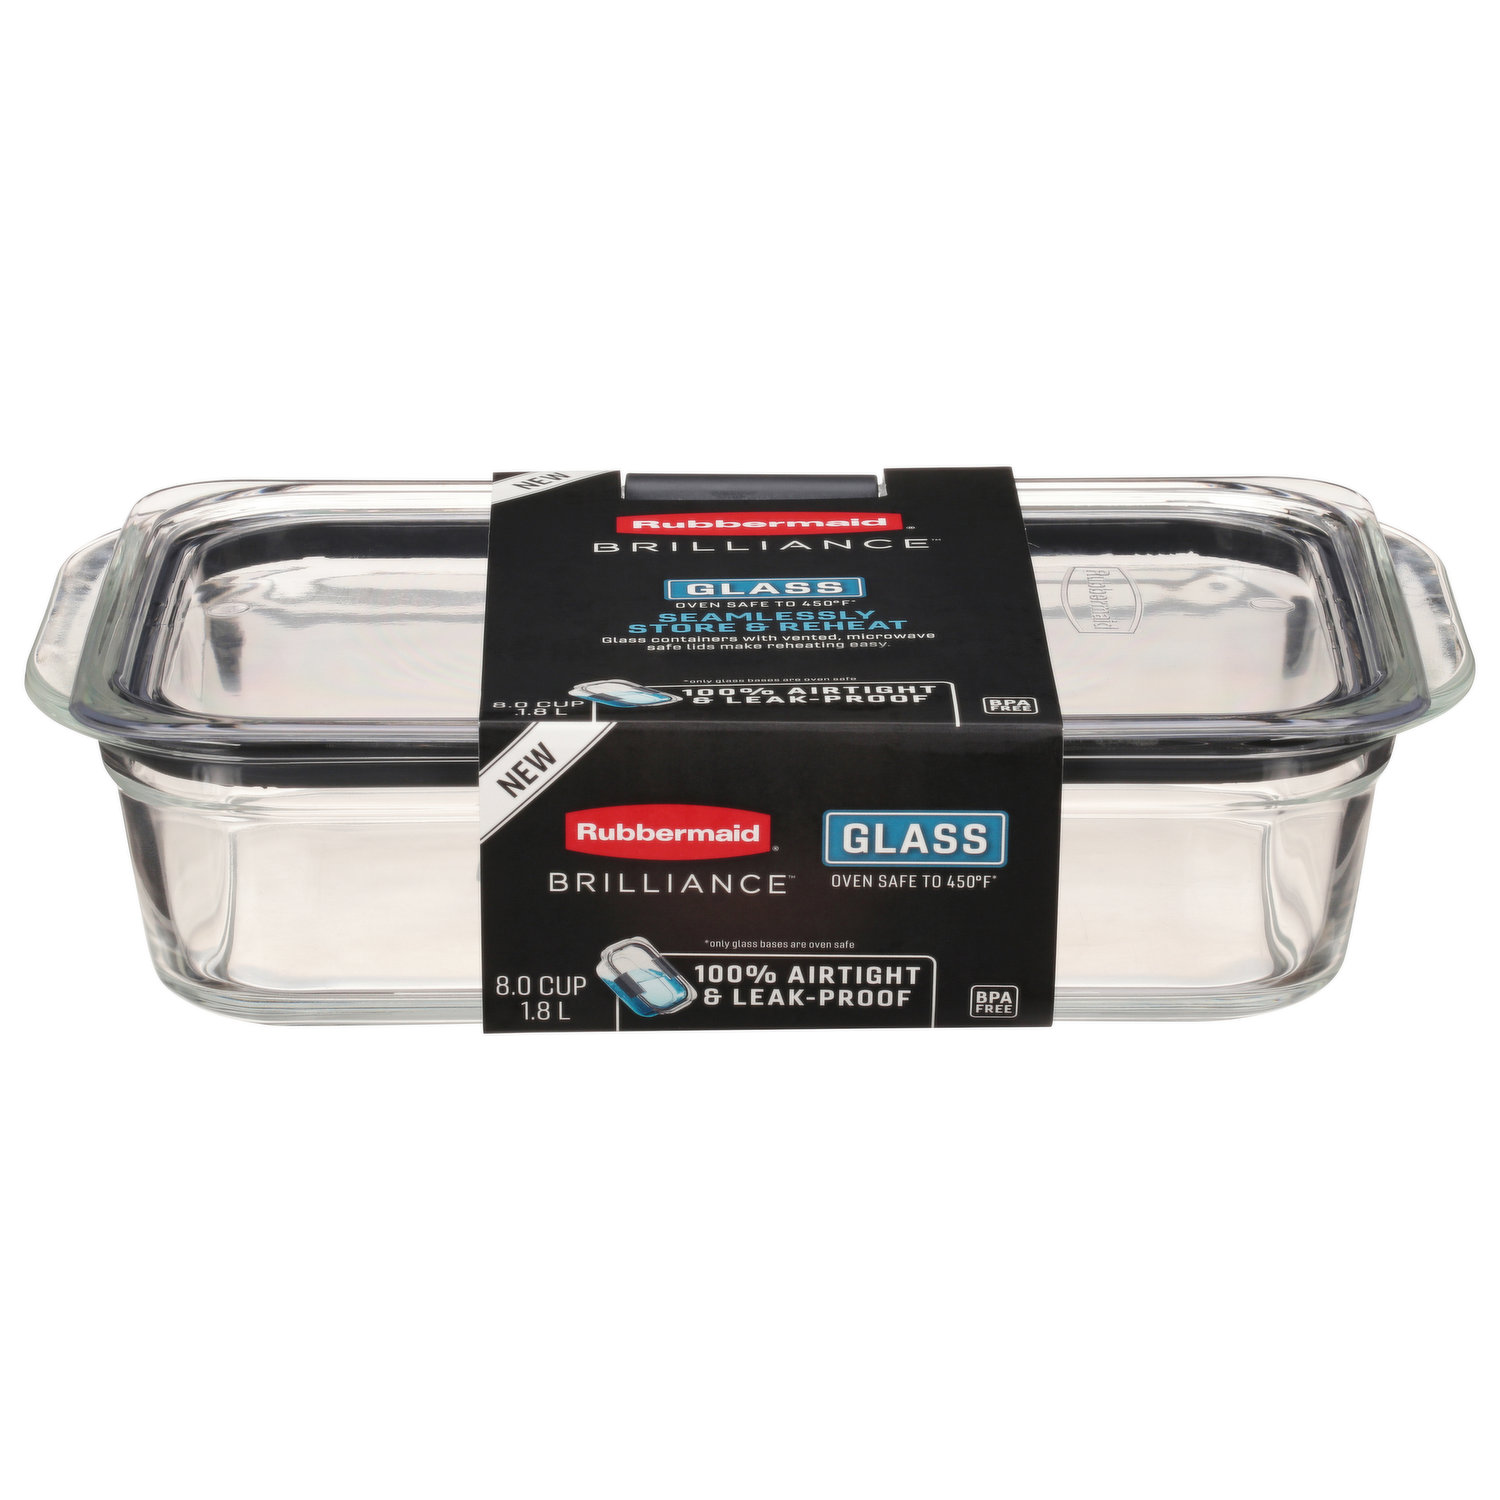  Microwave Food Storage Tray Containers - 3 Section/Compartment  Divided Plates w/Vented Lid (Assorted): Home & Kitchen